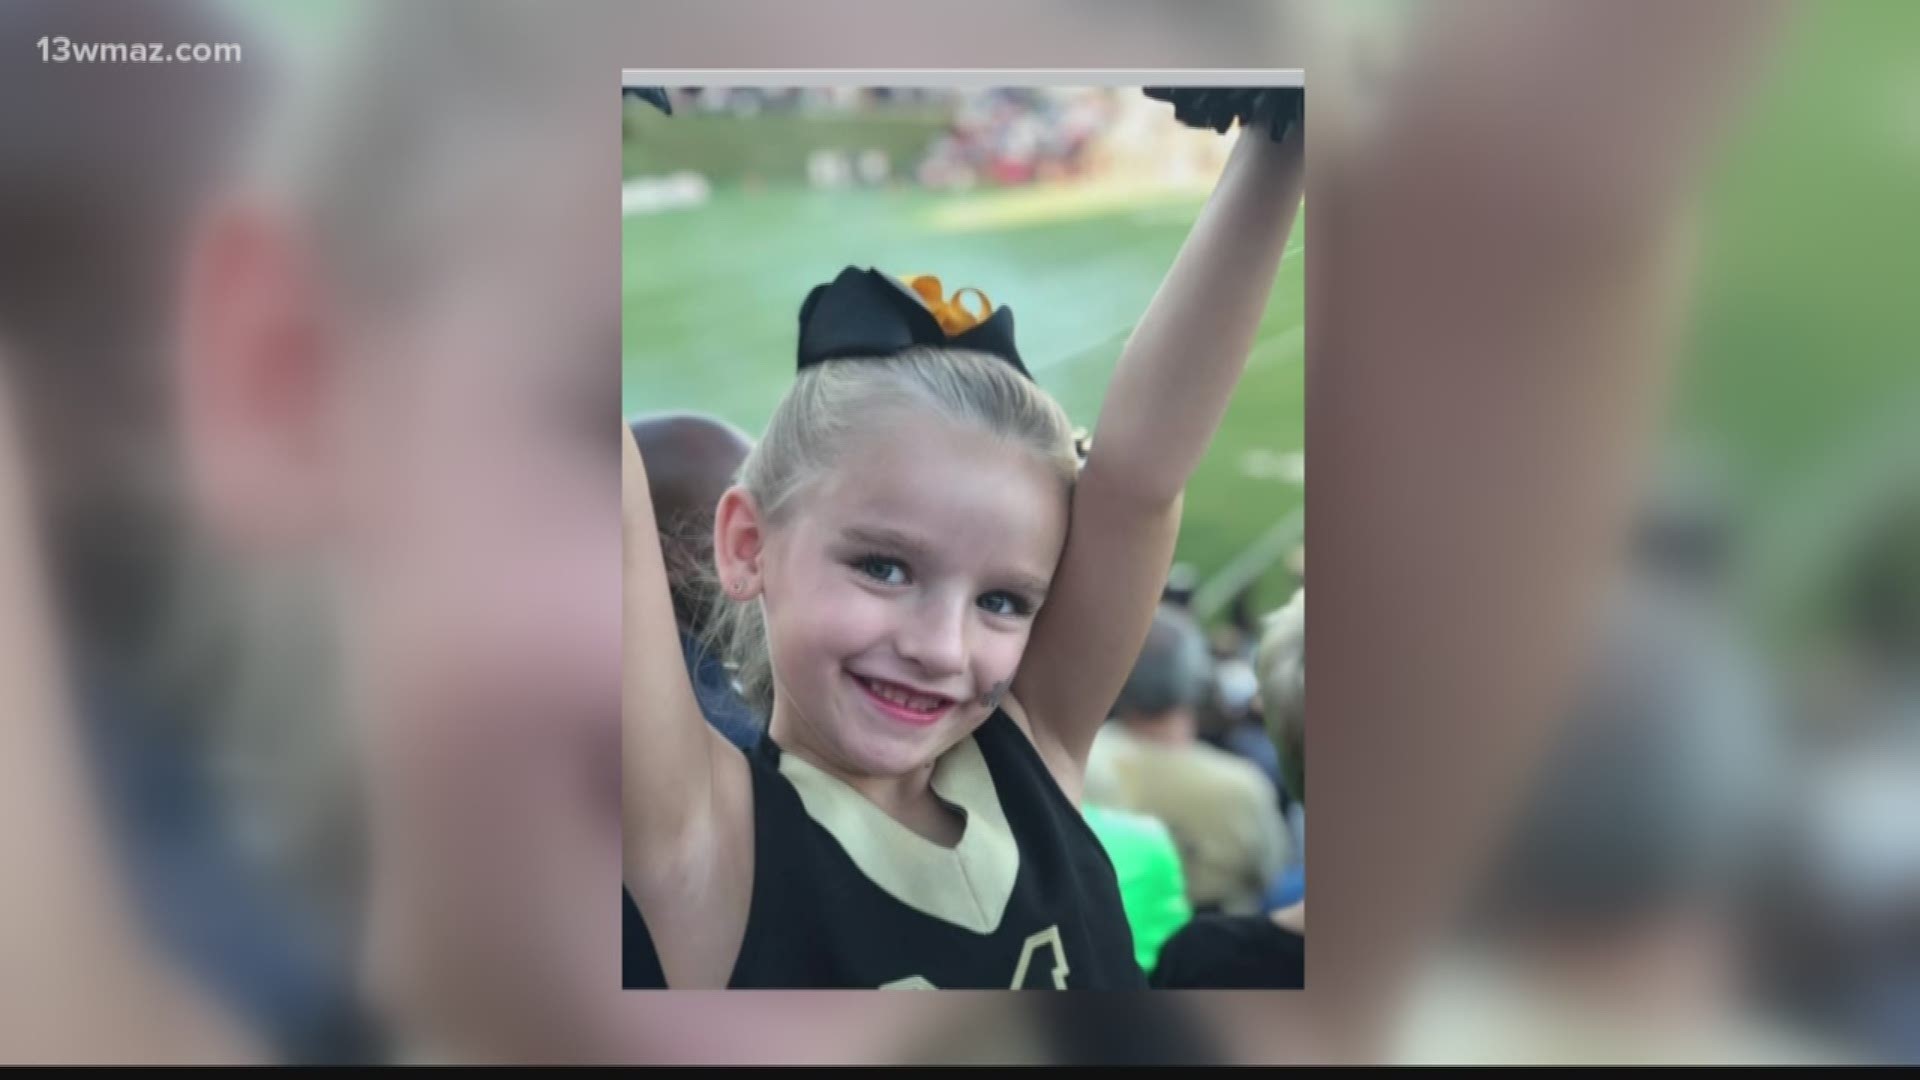 As a Monroe County girl and her family are dealing with her inoperable brain tumor and mounting medical bills, people are coming together to support her.